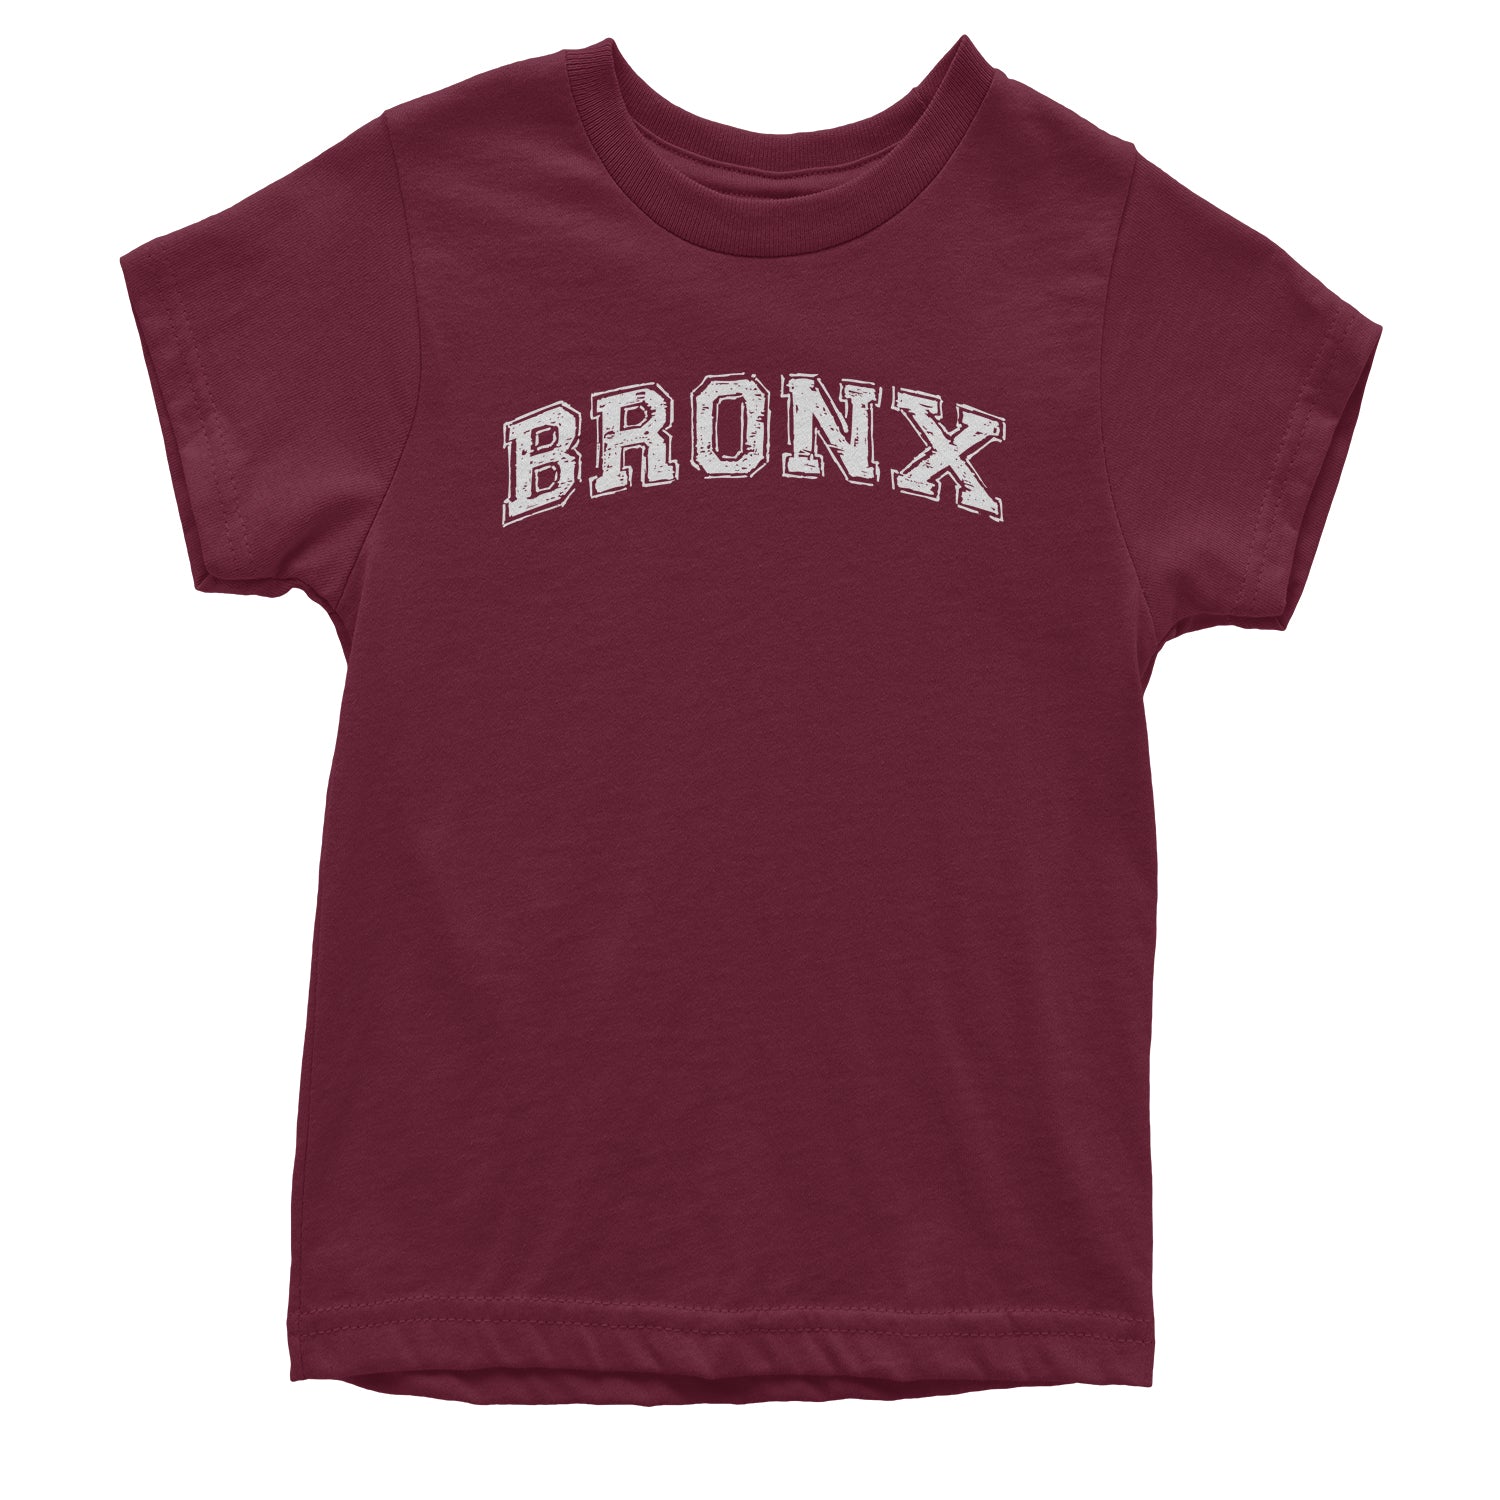 Bronx - From The Block Youth T-shirt b, cardi, concert, its, Jennifer, lopez, merch, my, party, tour by Expression Tees